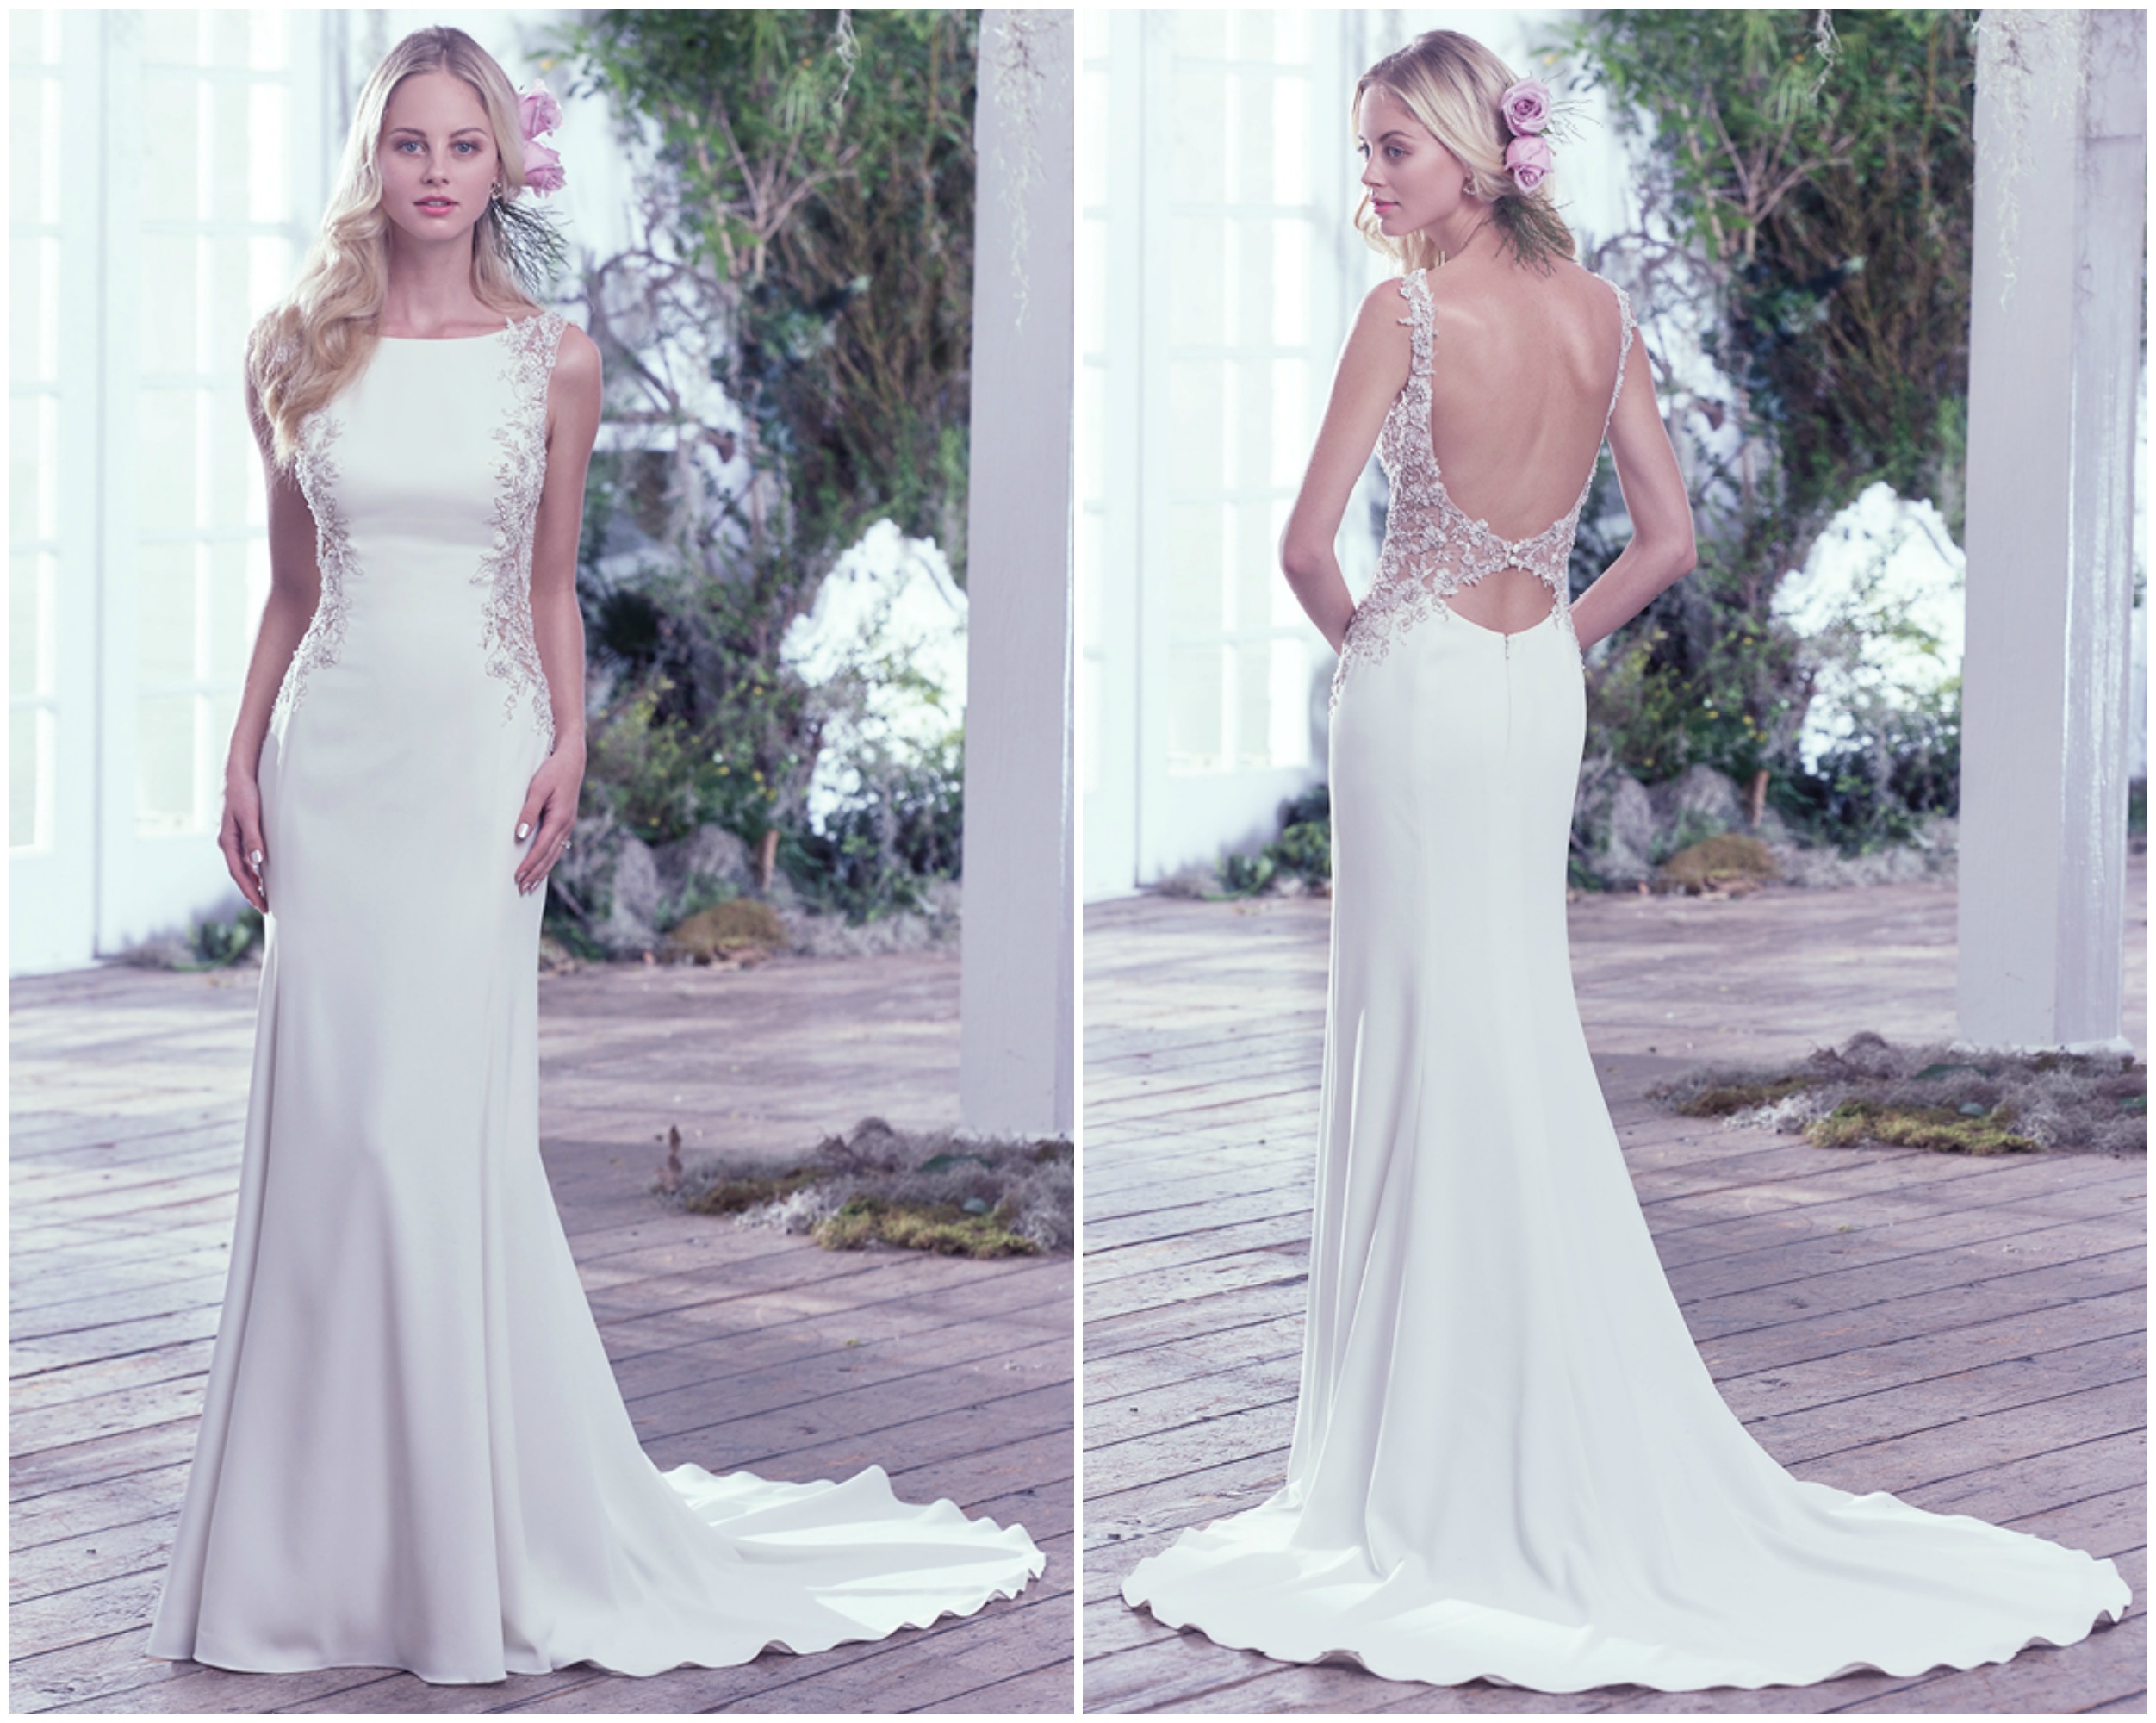 A dramatic scoop back is accented with an illusion closure creating a sexy keyhole below the natural waist. Artfully placed lace embellishments featuring Swarovski crystals adorn each illusion side panel adding a modern twist to this Yolivia Crepe satin sheath wedding dress with high bateau neckline. Finished with a zipper closure. 

<a href="https://www.maggiesottero.com/maggie-sottero/andie/9751" target="_blank">Maggie Sottero</a>